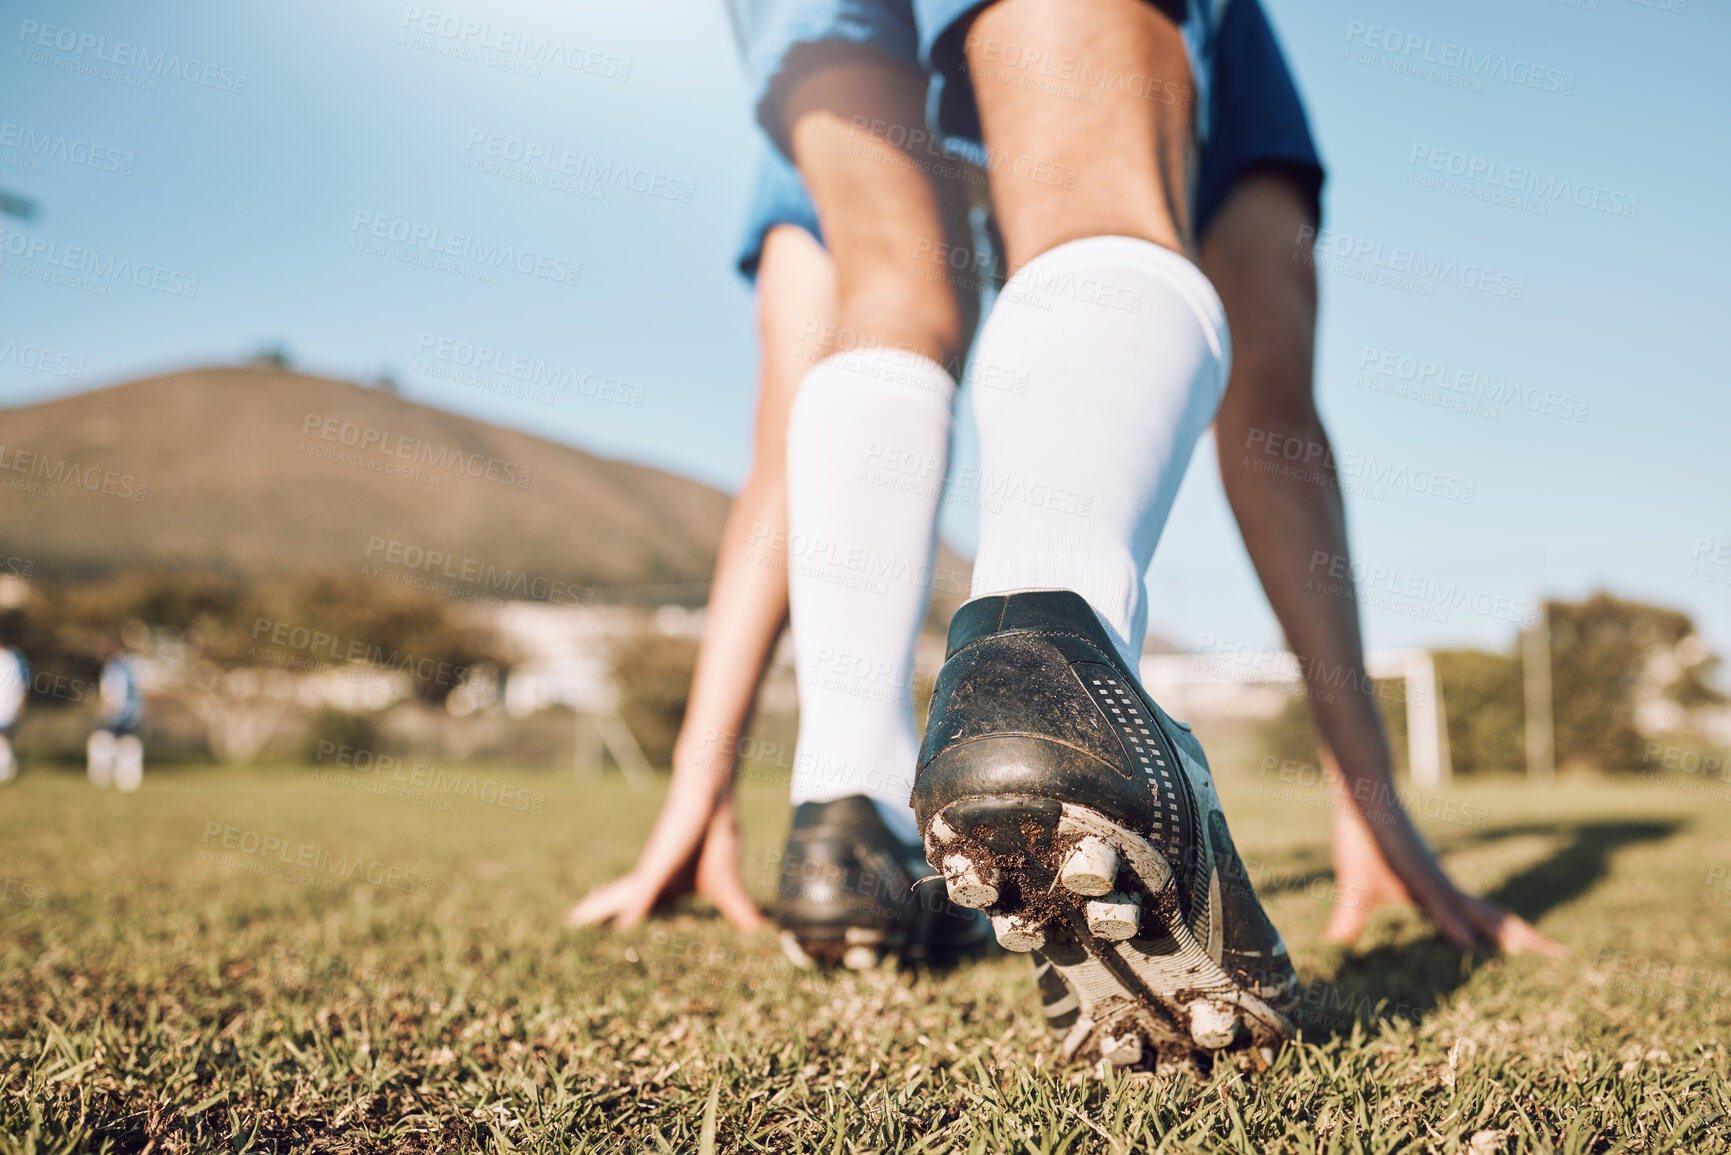 Buy stock photo Football player, shoes and start on field with sports and fitness outdoor, athlete legs and running in training session. Soccer, wellness and active lifestyle, professional sport man and team game